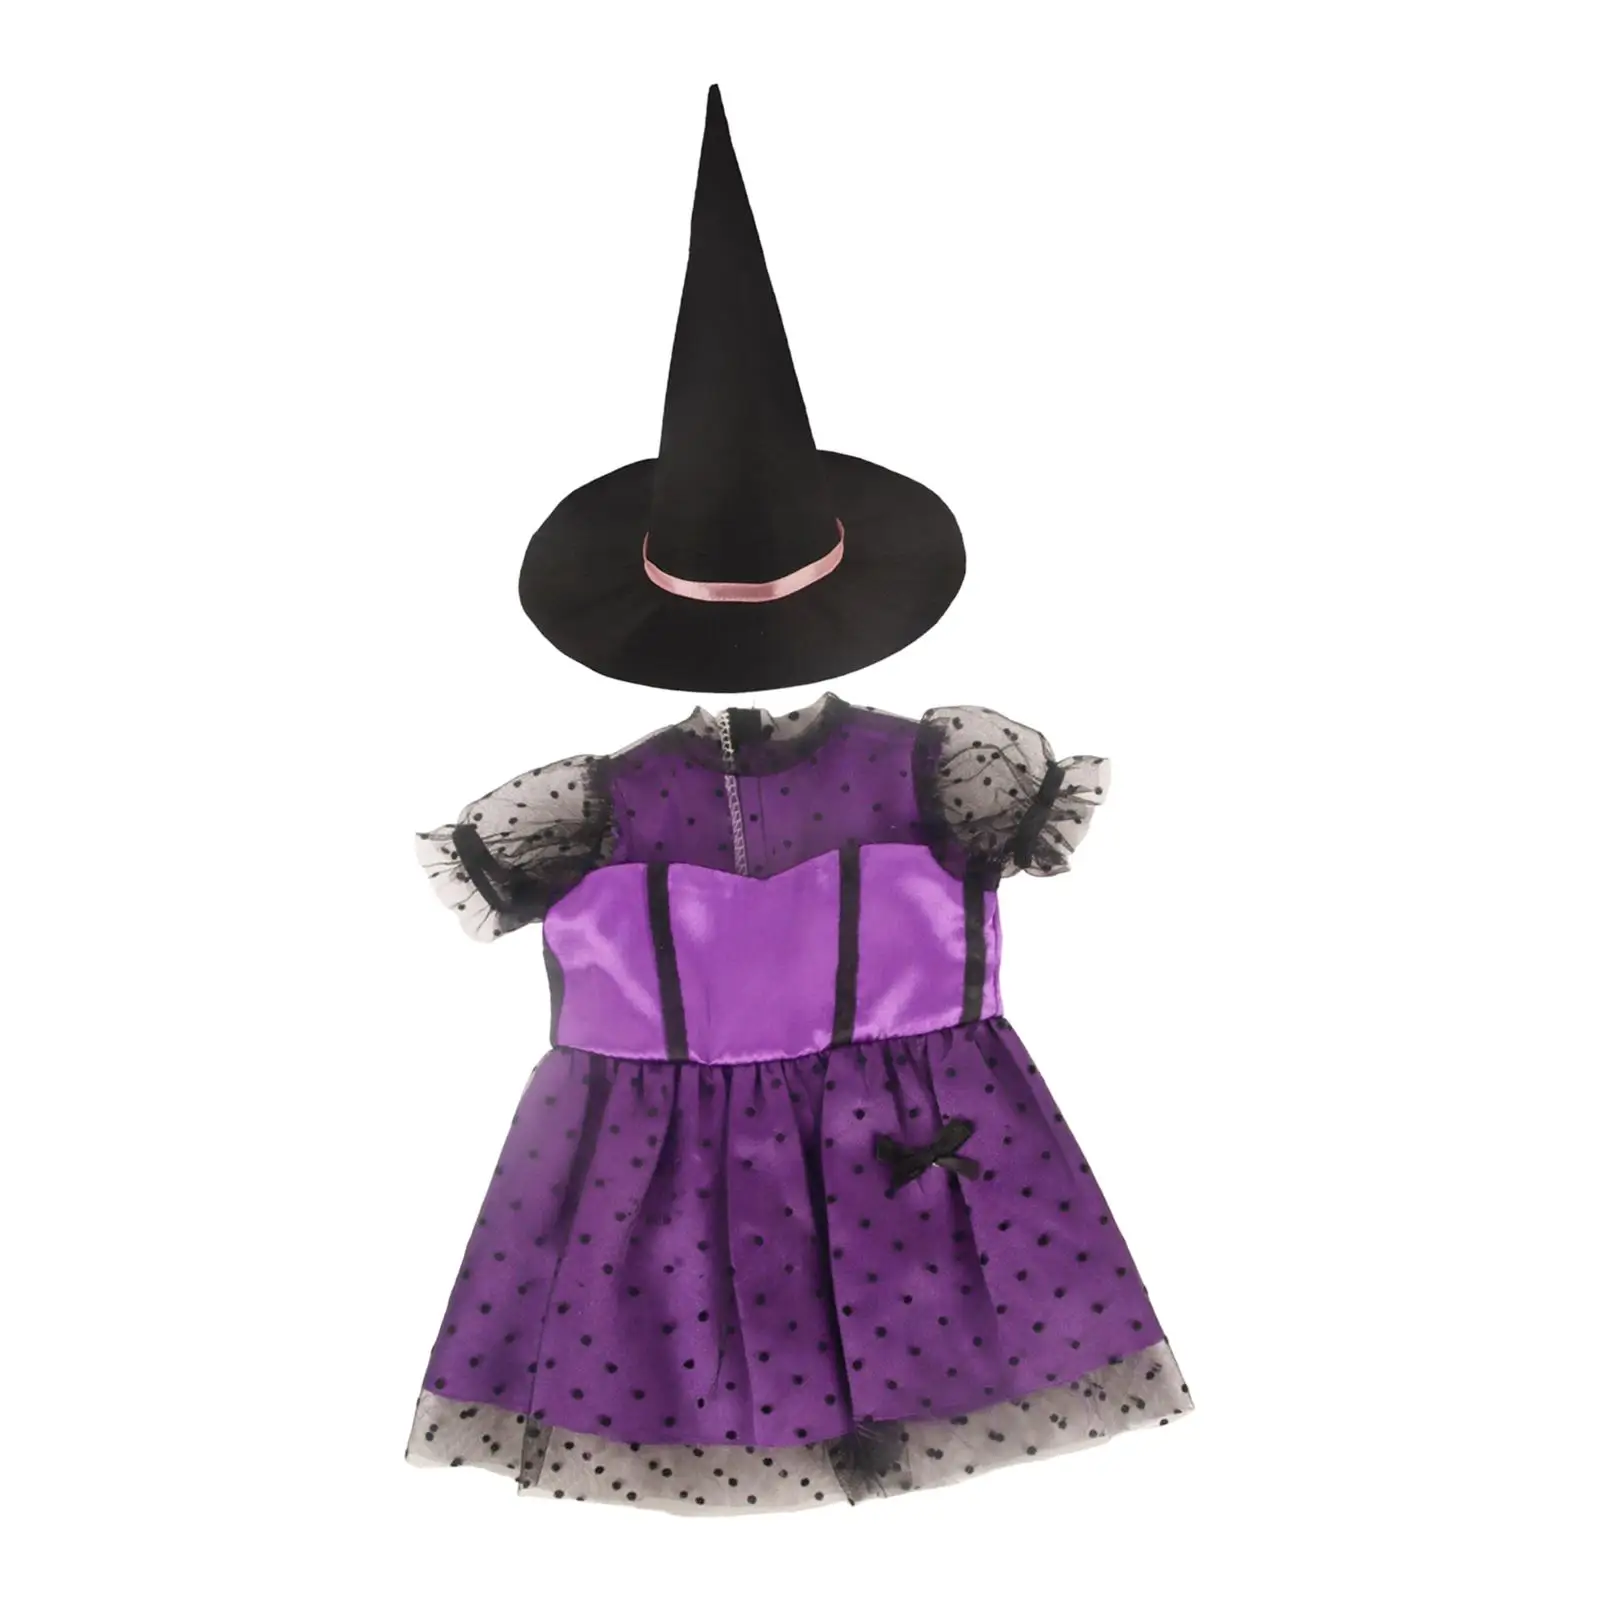 18 inch Girl Doll Dress Hat Fashion Doll Accessory Outfit for Everyday Play Role Playing Festival Activity Cosplay